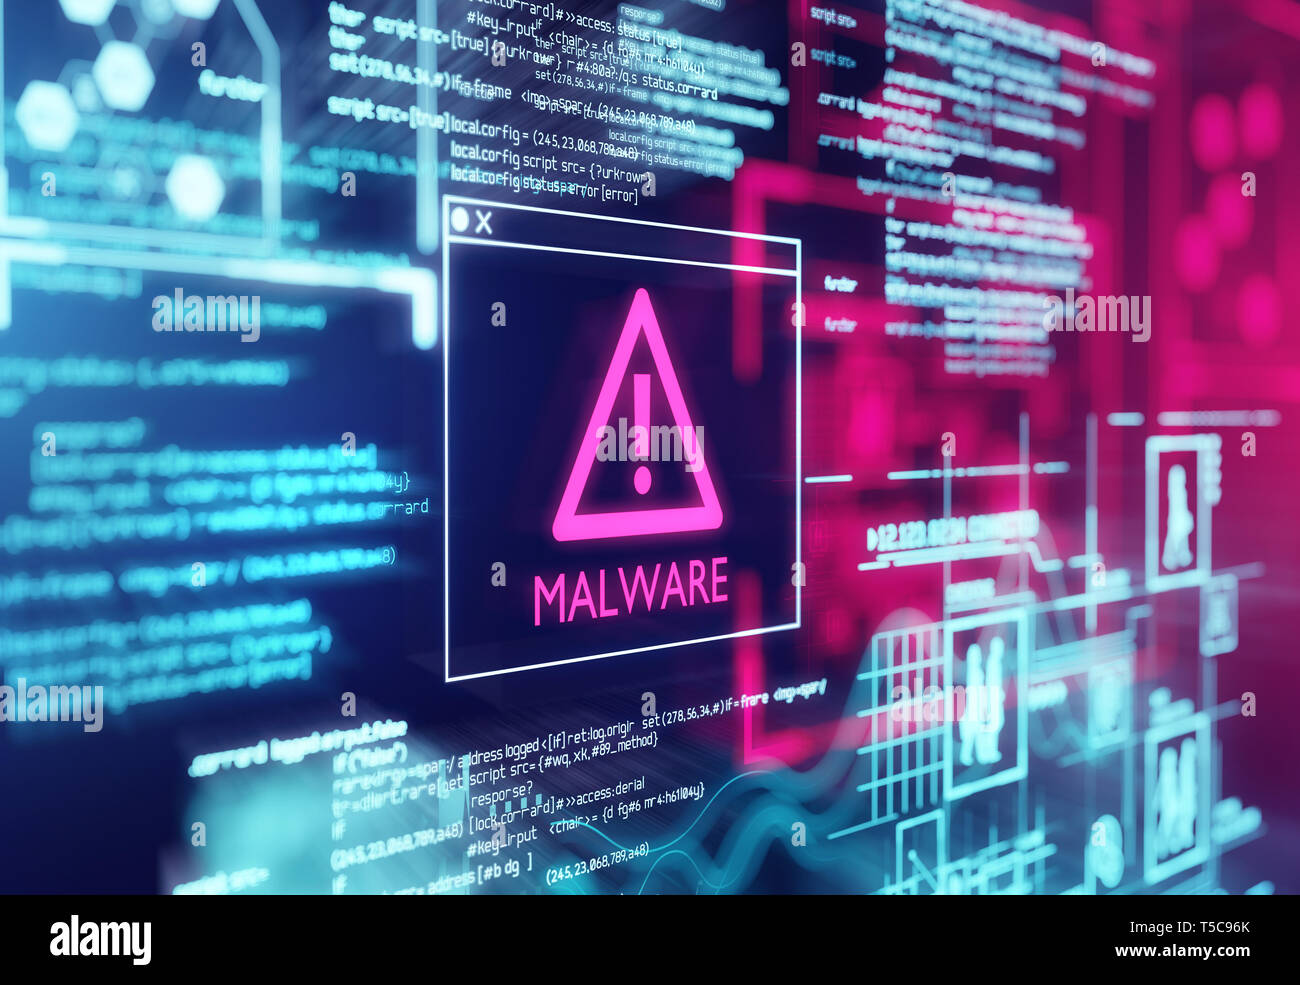 A computer screen with program code warning of a detected malware script program. 3d illustration Stock Photo